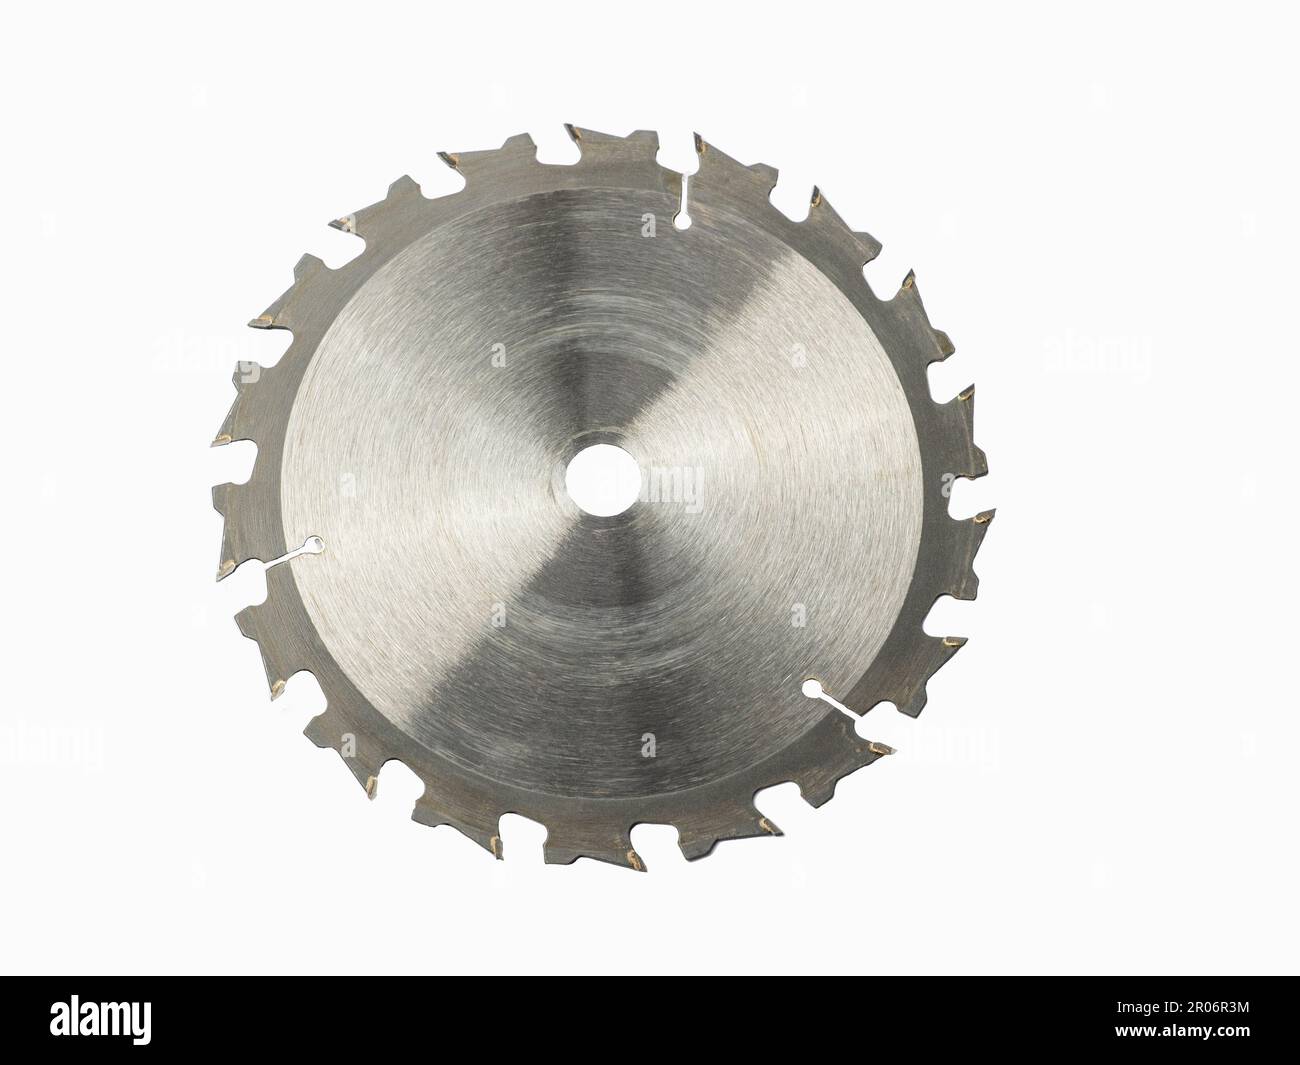 A circular saw blade cropped against white background. Close up. Stock Photo